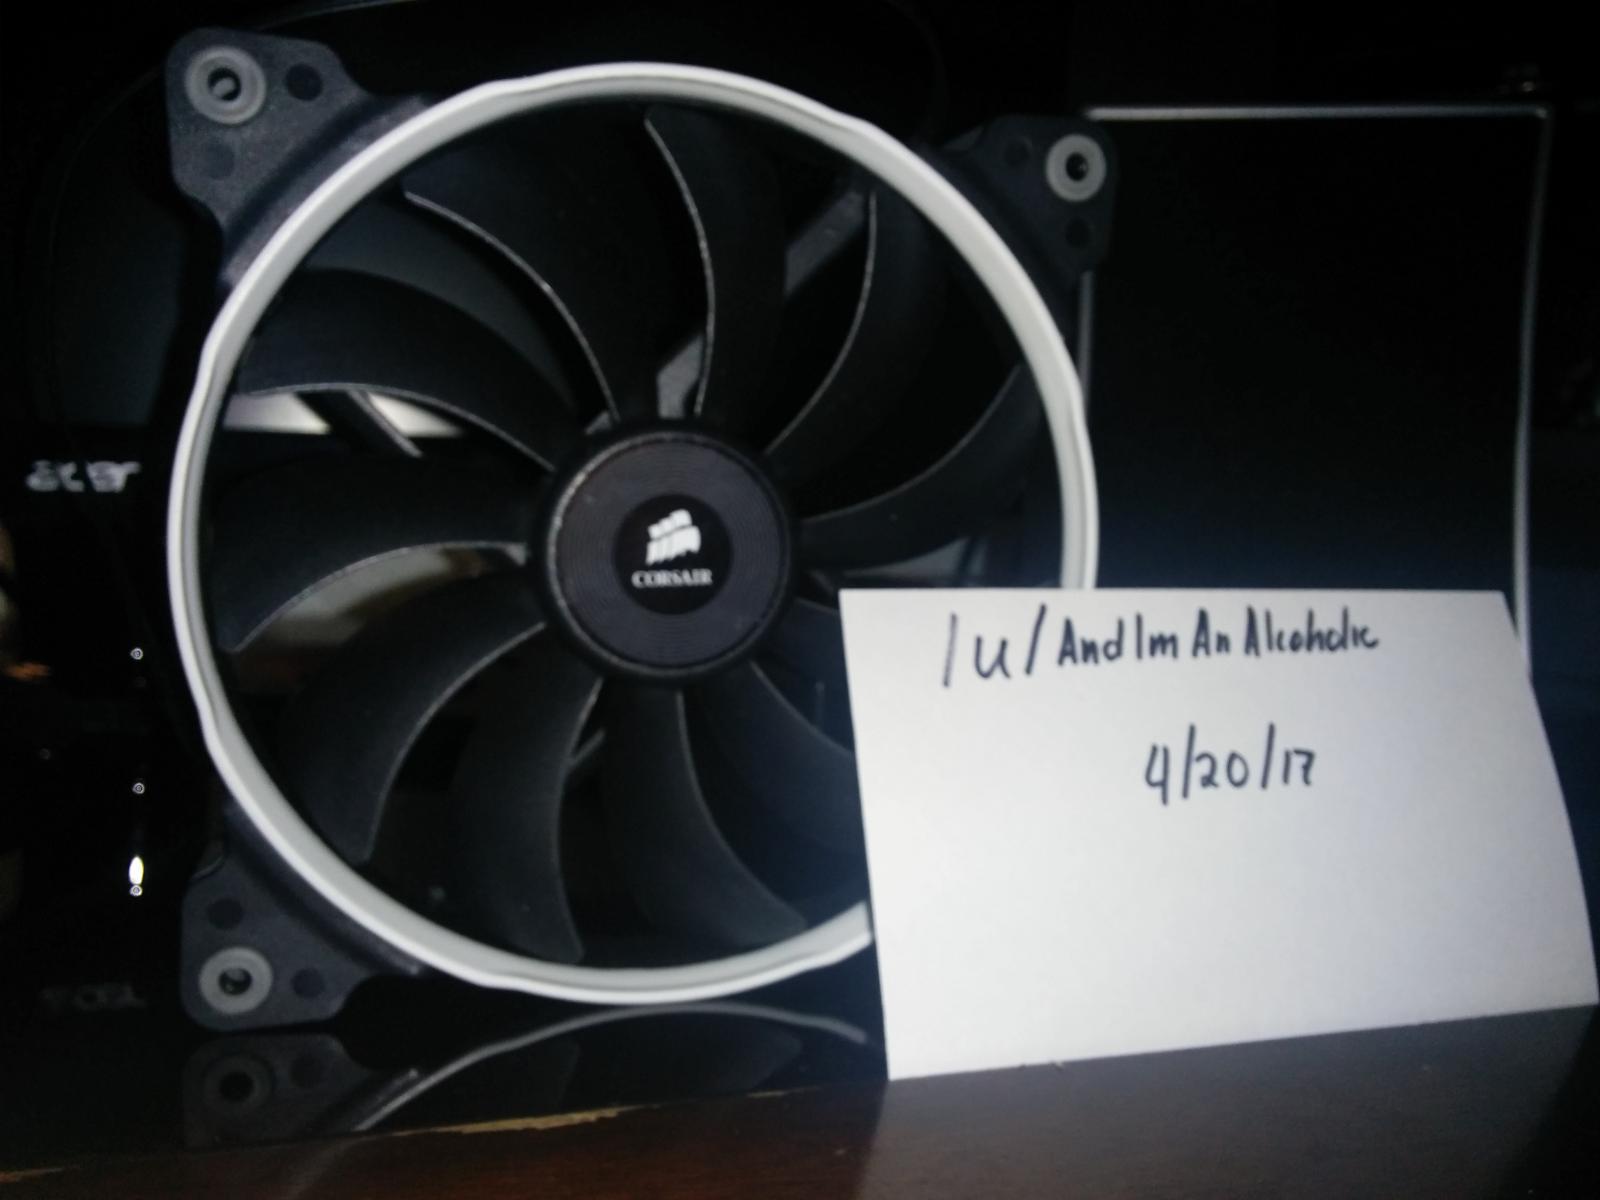 For sale Corsair Air Series AF140 Quiet Edition Single Fan (non LED, white ring)